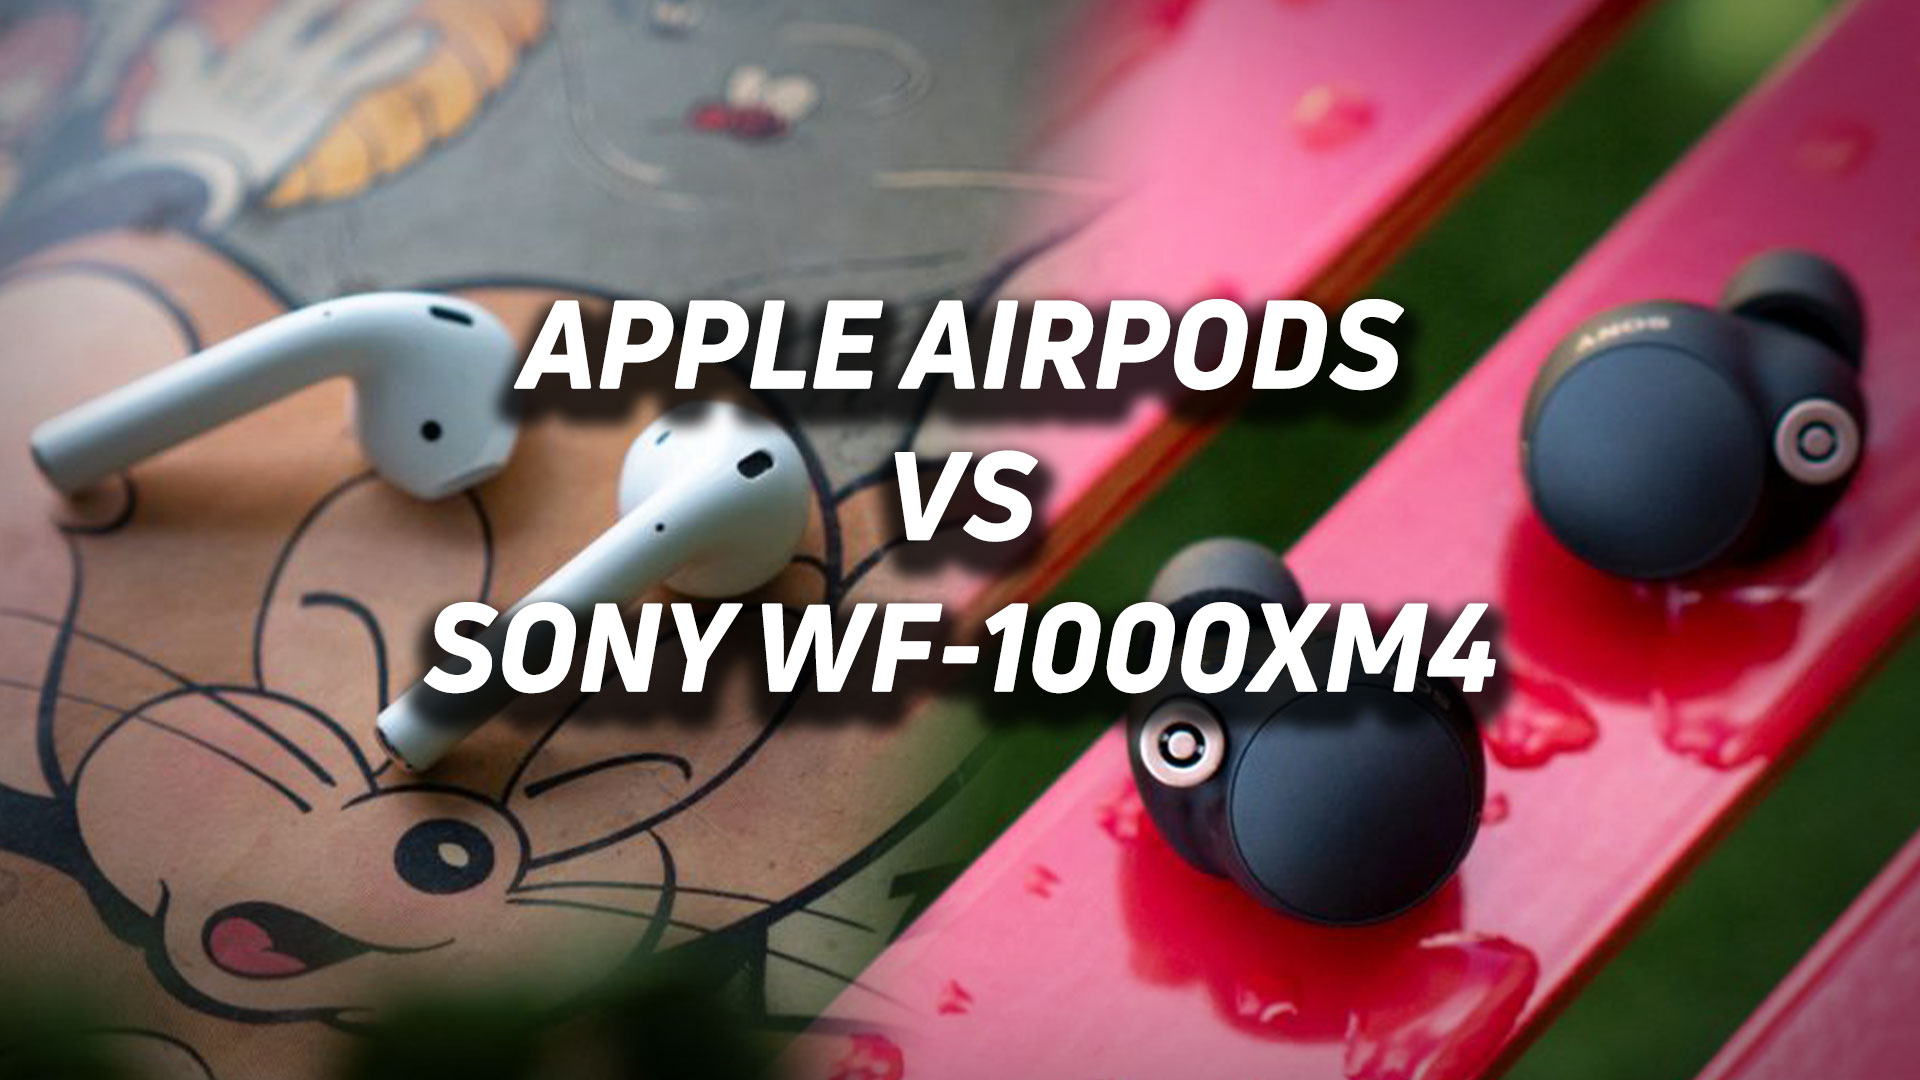 A blended image of the Apple AirPods and Sony WF-1000XM4 true wireless earbuds with versus text overlaid.